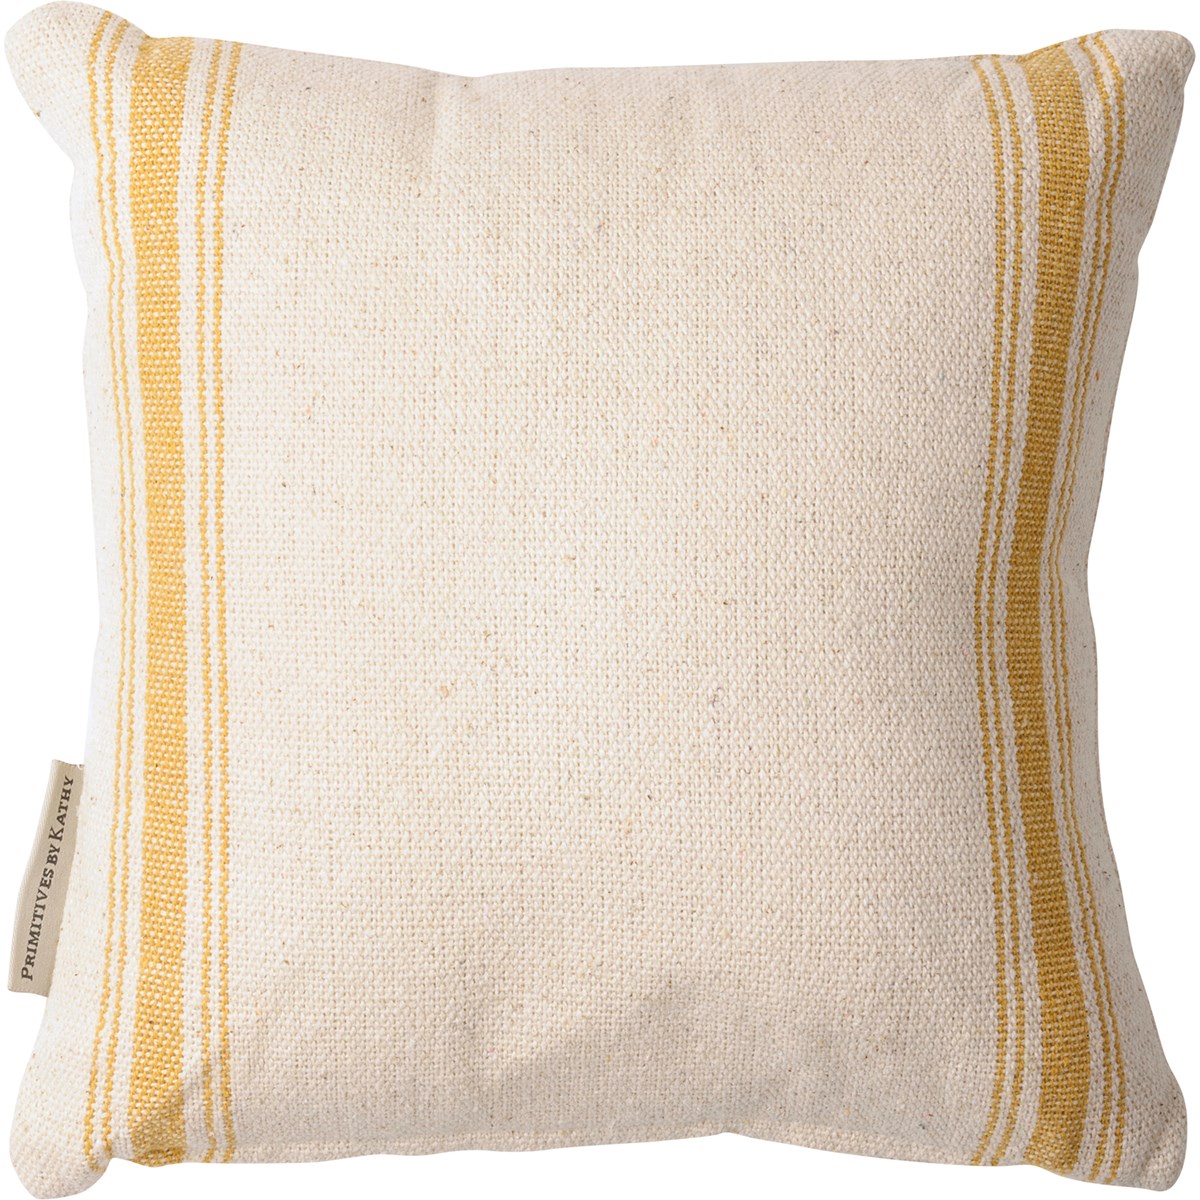 Reserved For The Cat Pillow - Cotton, Zipper